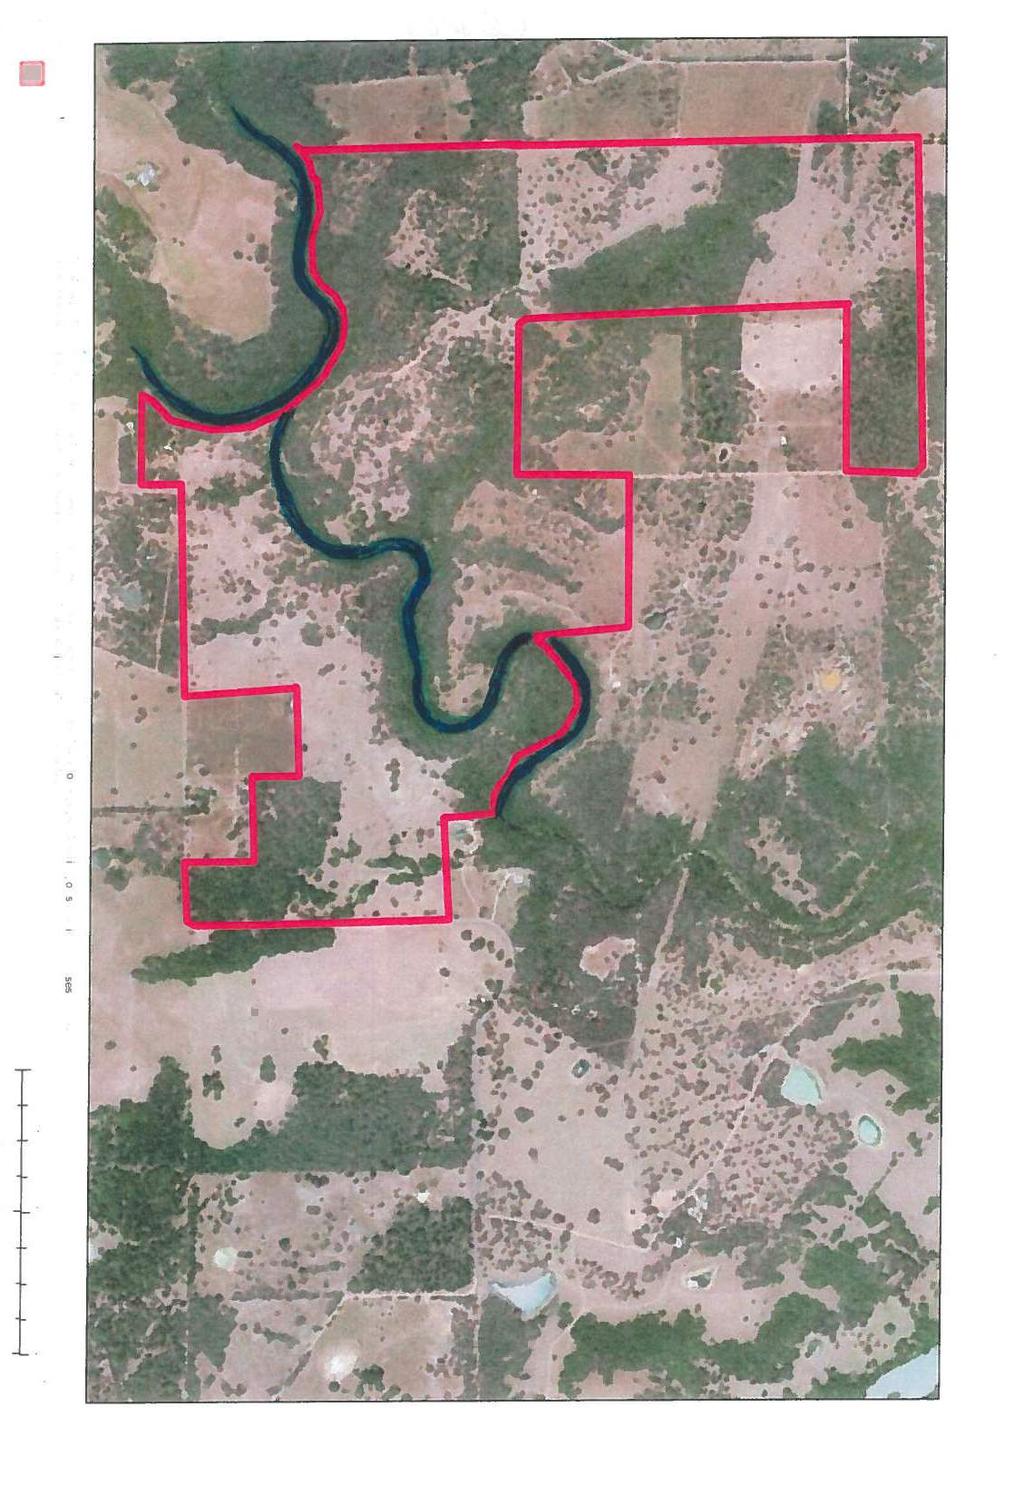 Q Red line indicate the estimated property boundaries Dark blue/black line shows the creek that borders and passes through the property. This map is for informational purposes only.